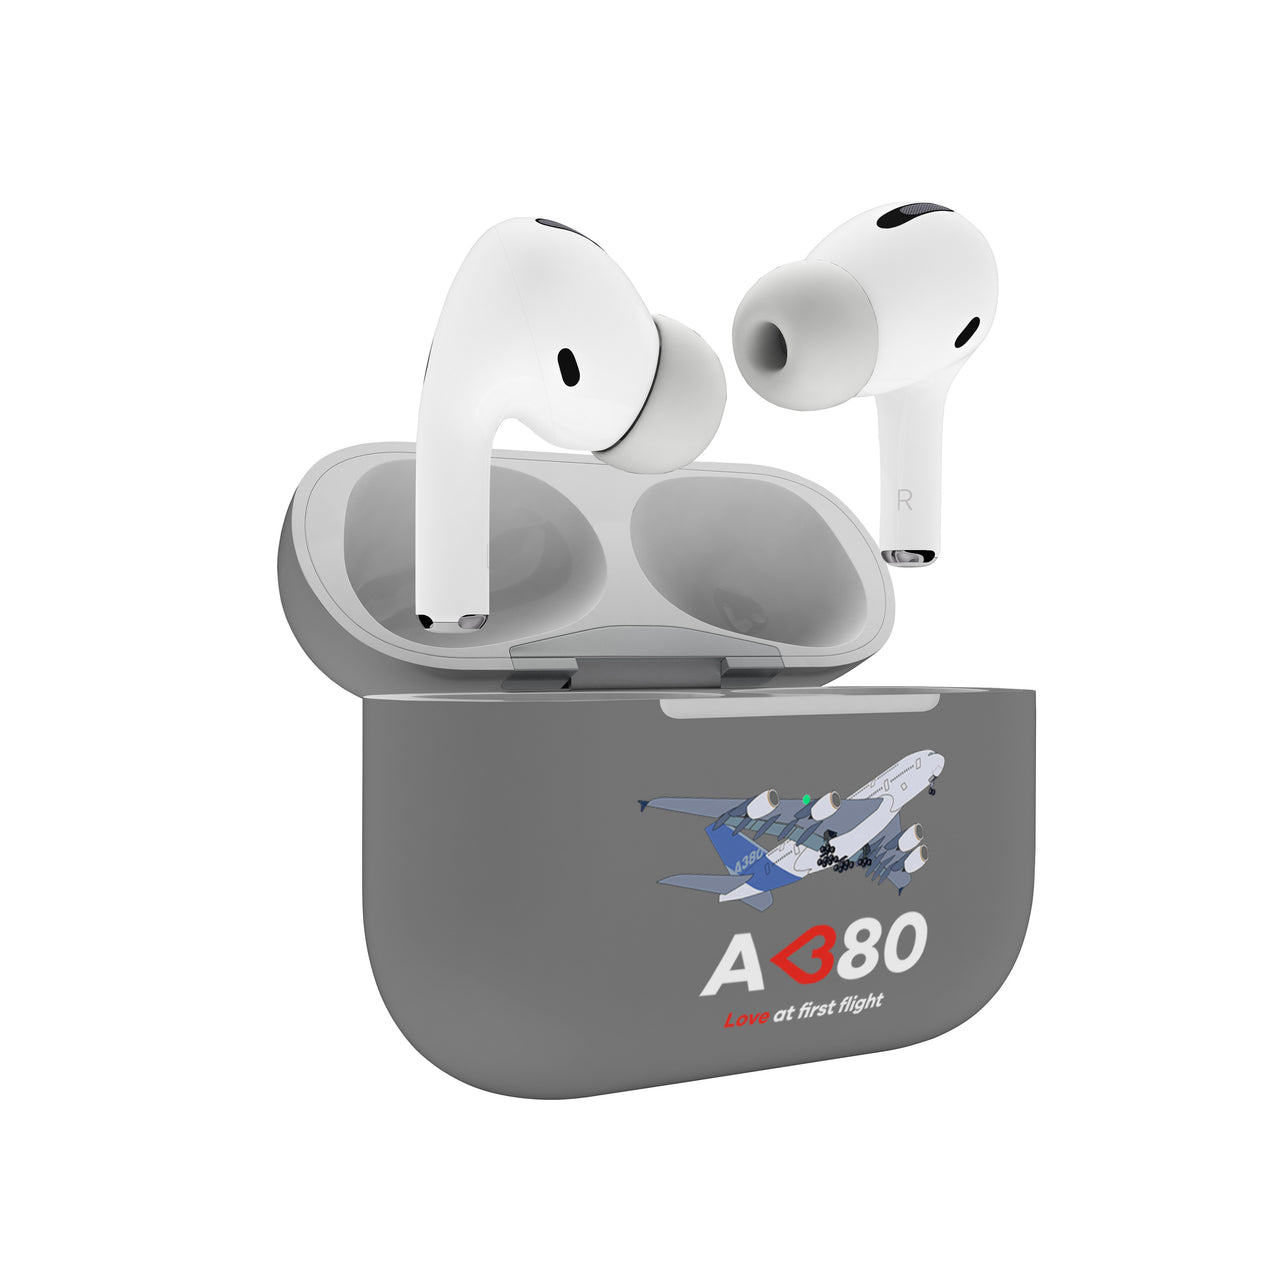 Airbus A380 Love at first flight Designed AirPods "Pro" Cases